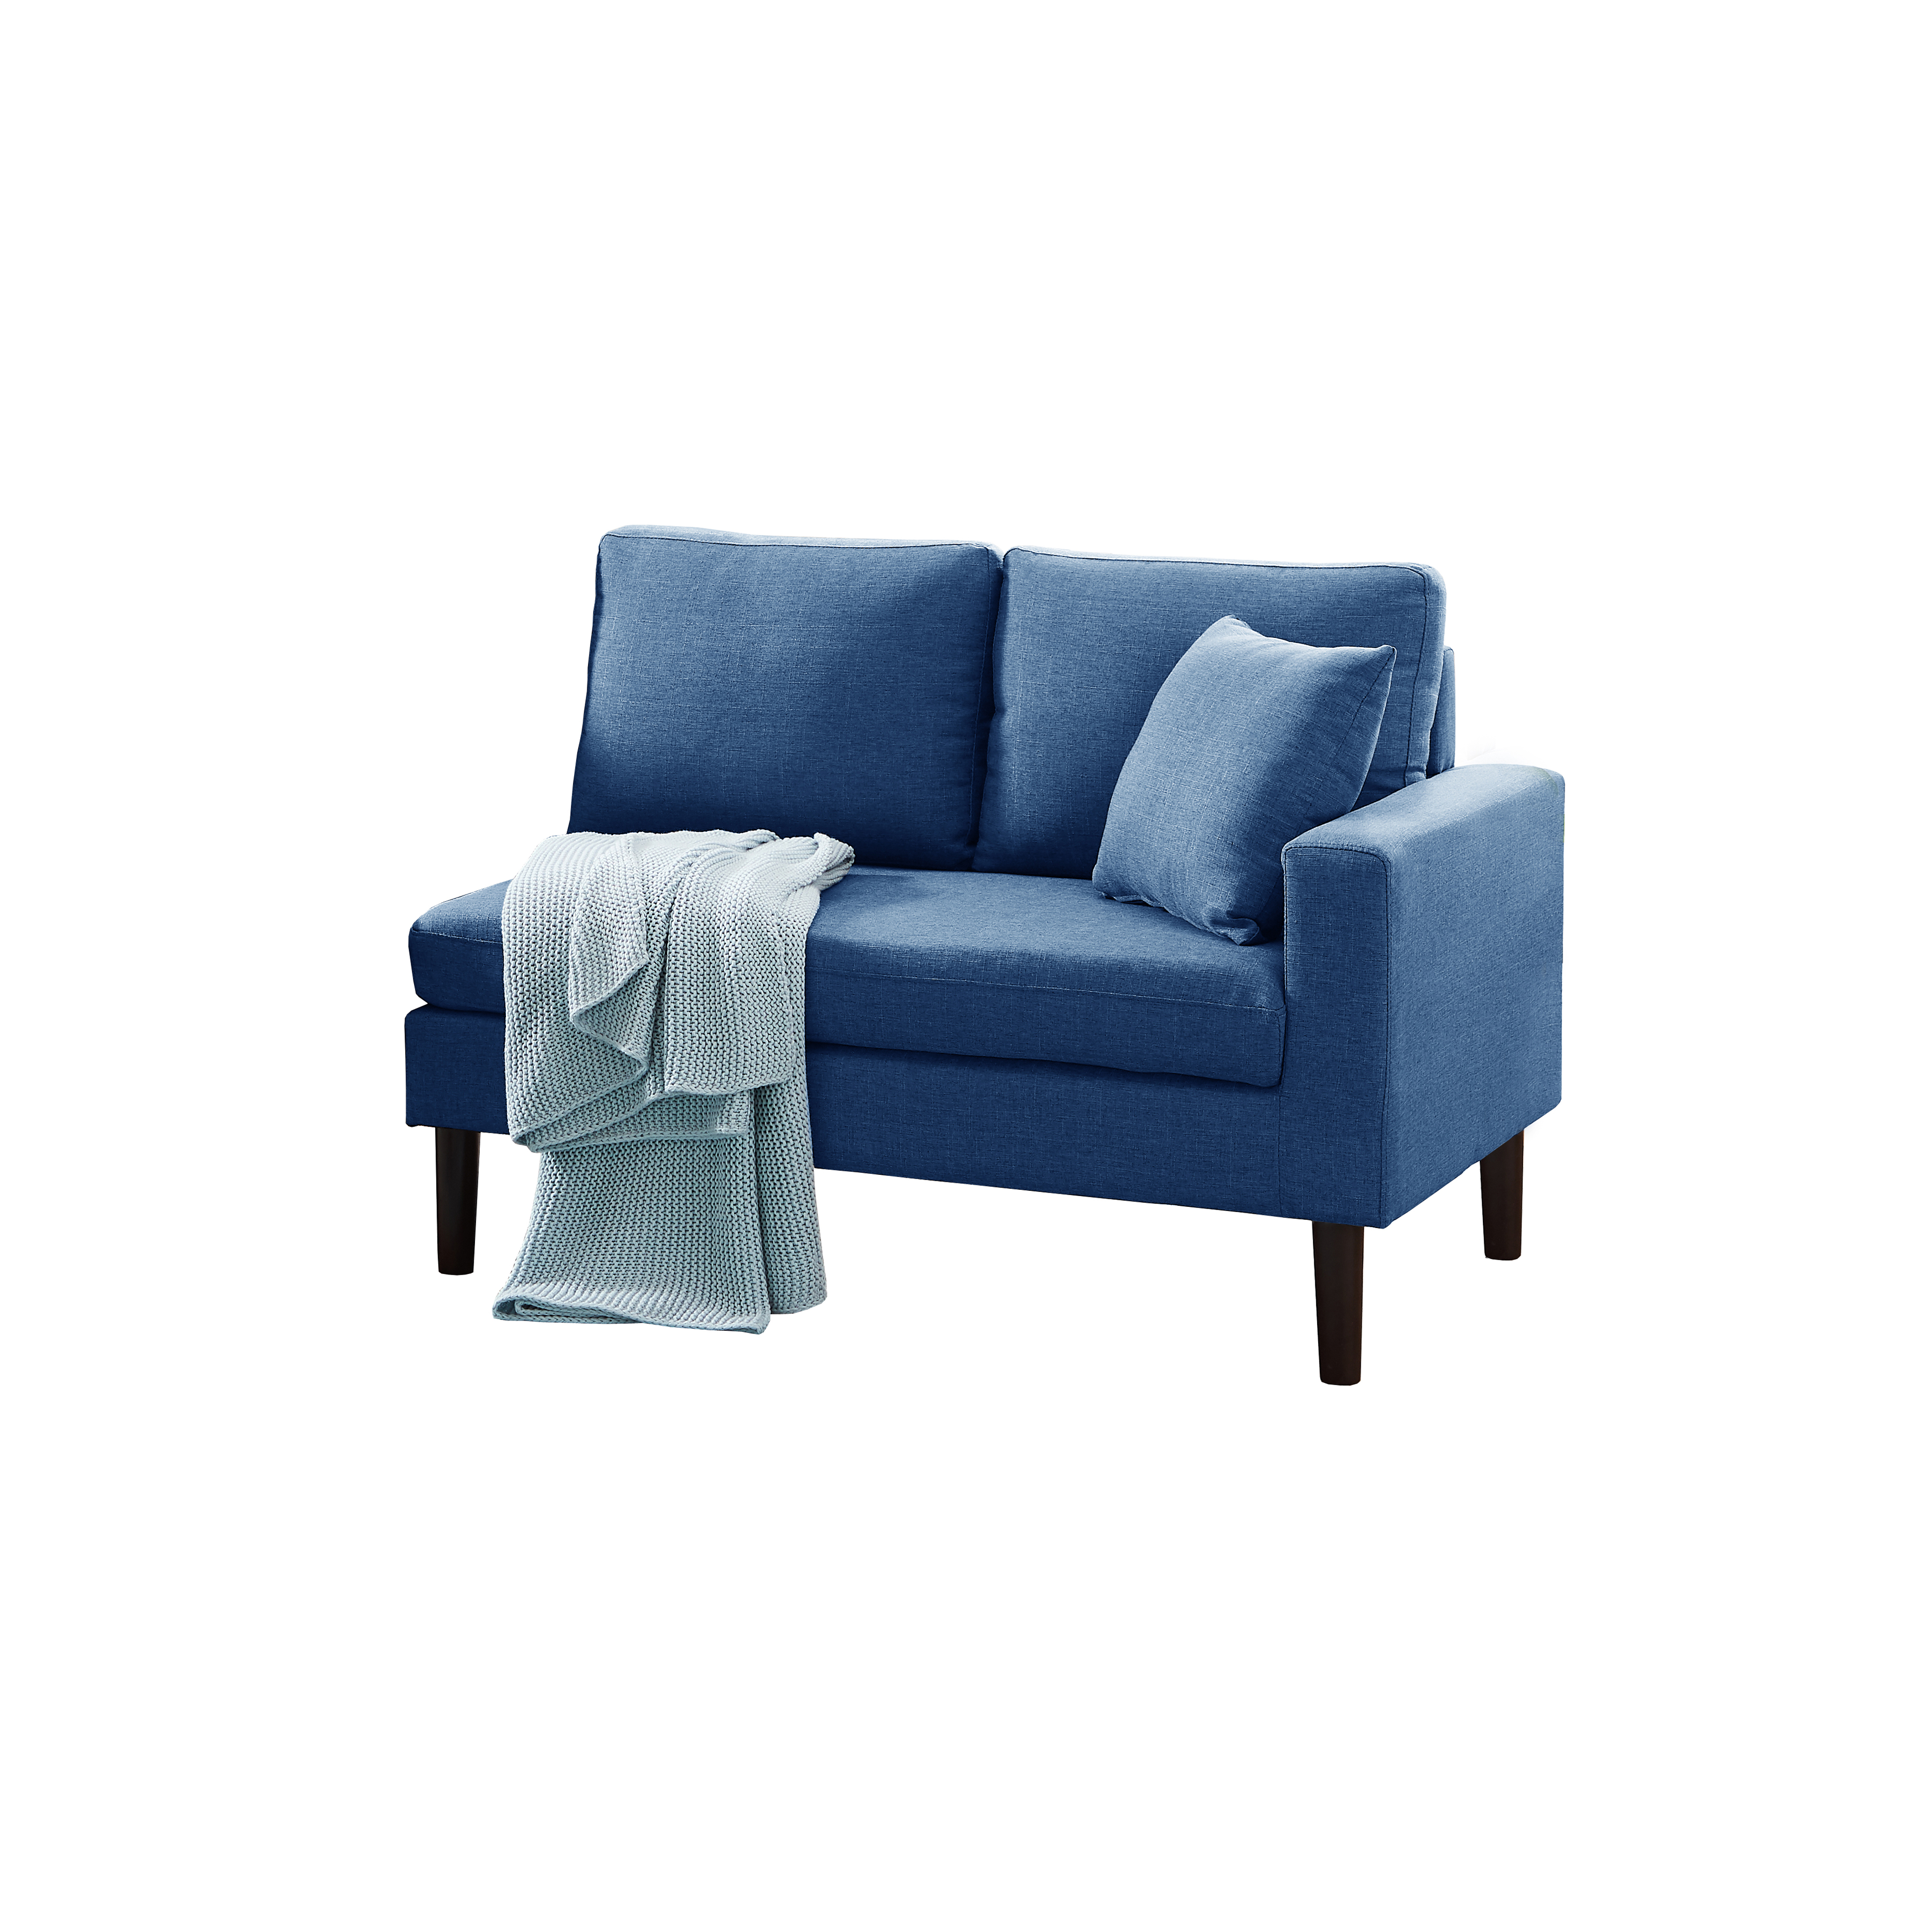 SOFA RIGHT FACING ARM NAVY BLUE COLOR (PART ONLY, Sold separatly)-Boyel Living